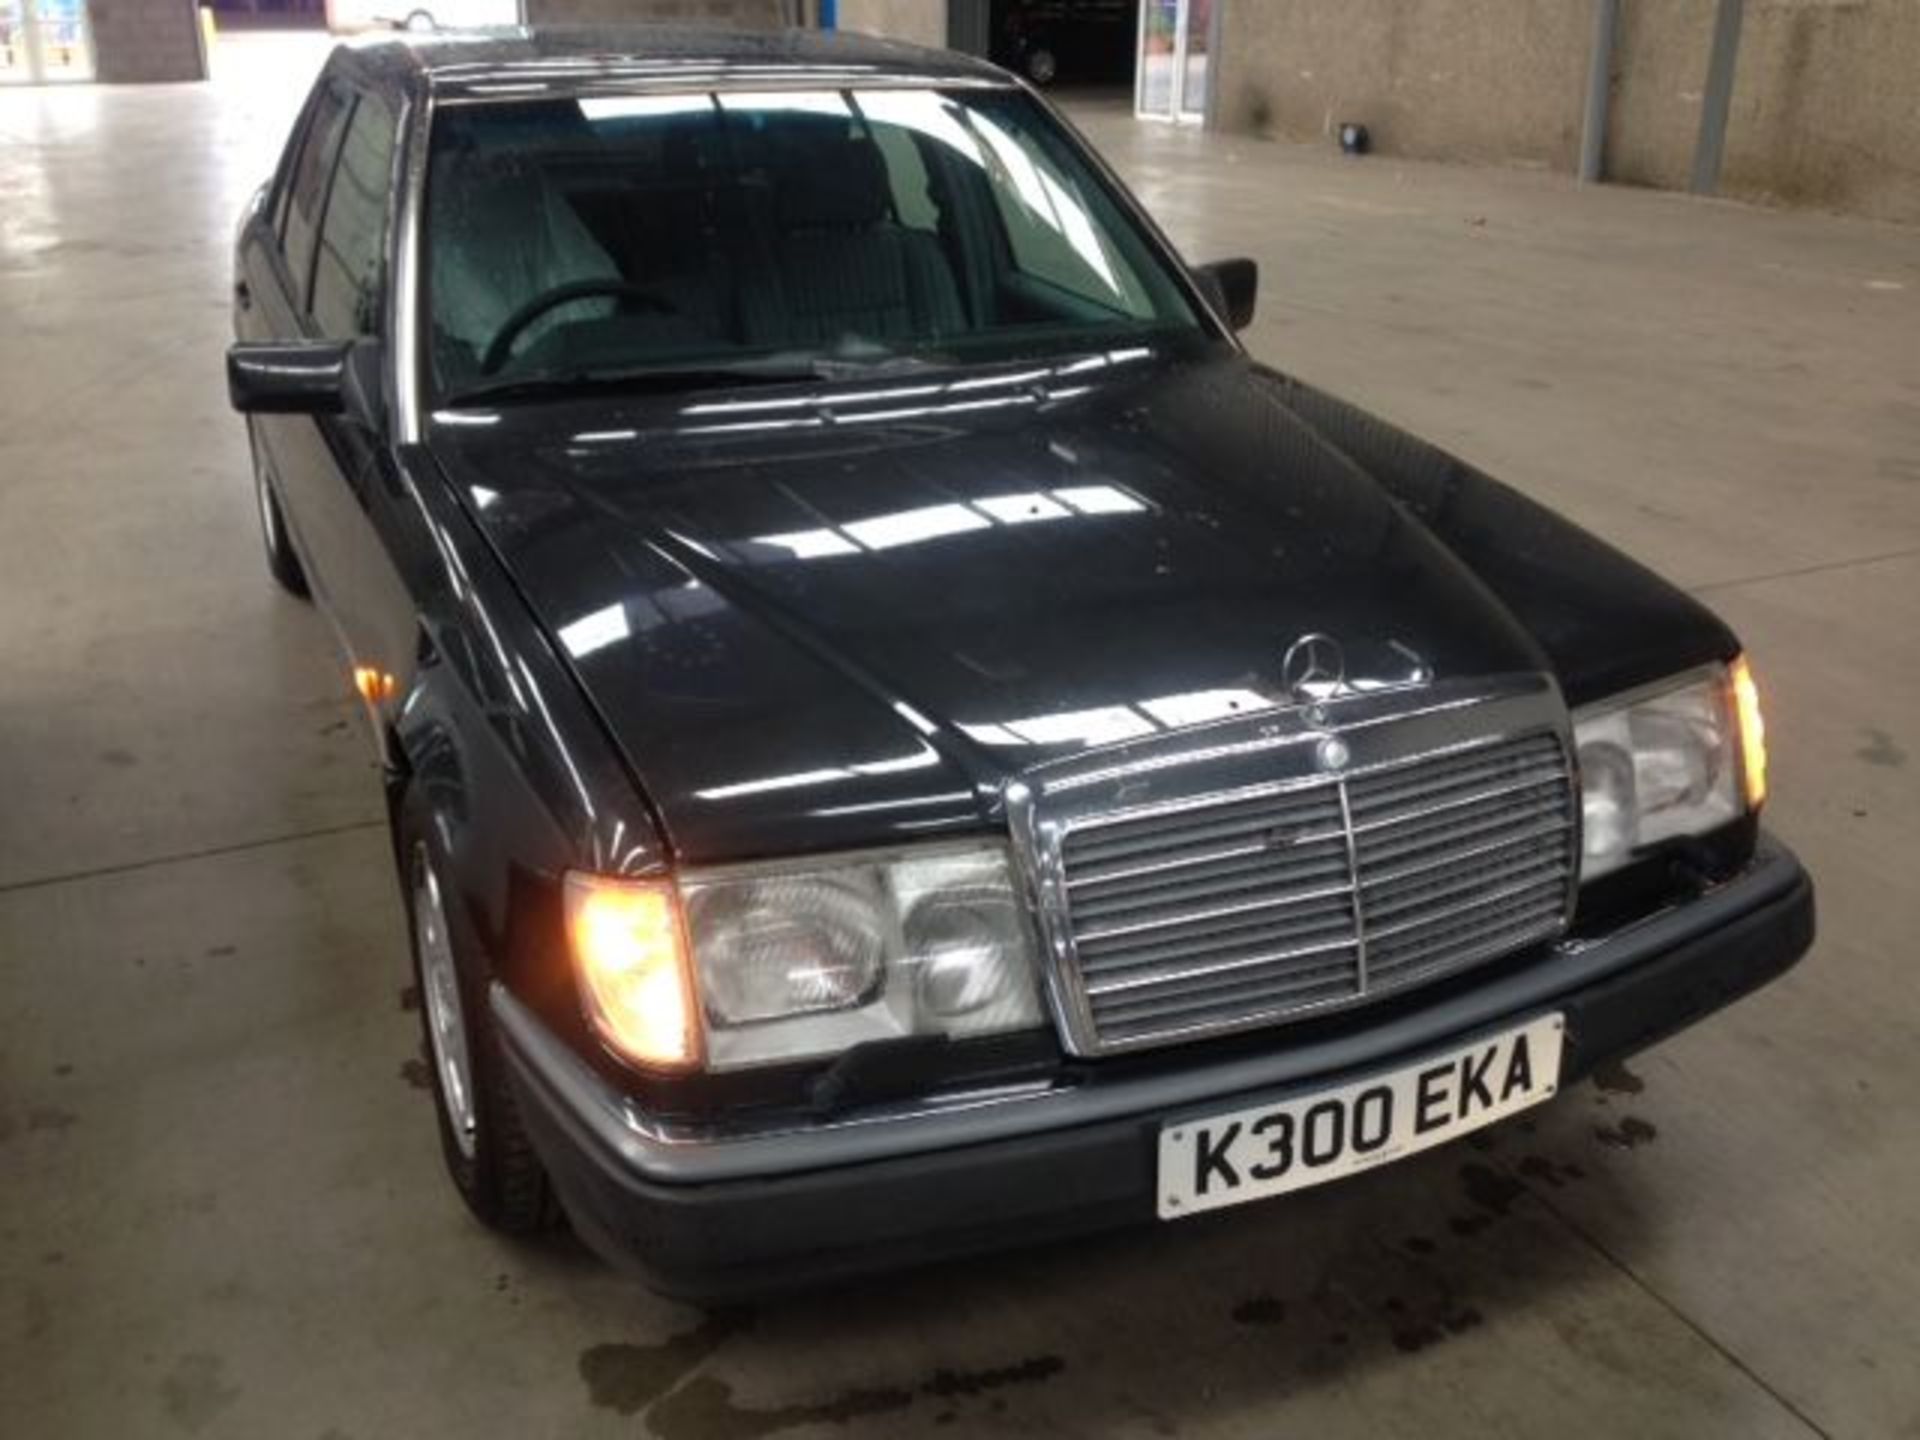 MERCEDES, 300E-24 - 2962cc, Chassis number WDB1240312B812957 - originally registered in Jersey and